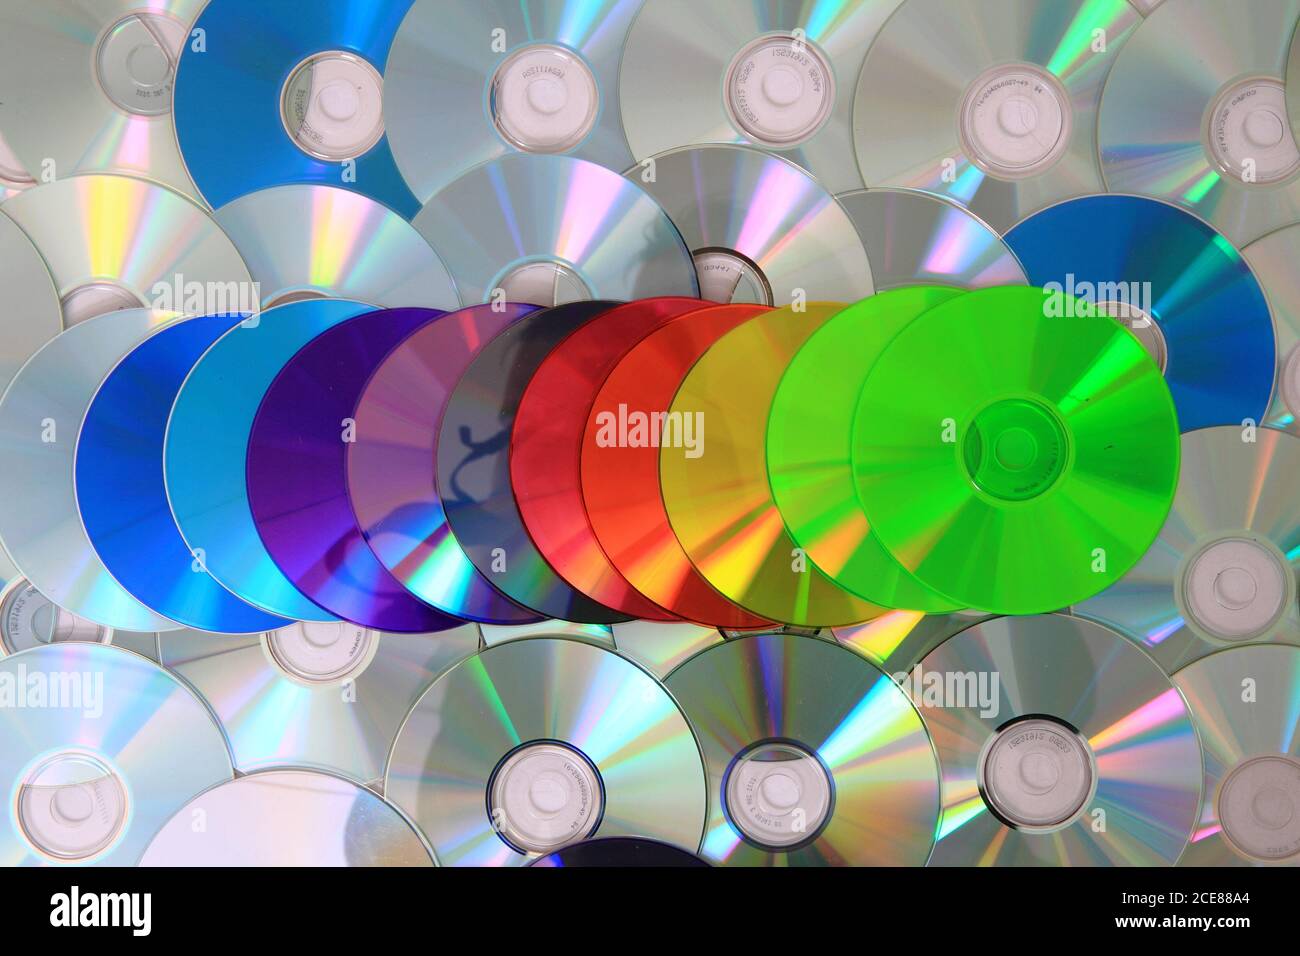 CD and DVD media as nice technology background Stock Photo